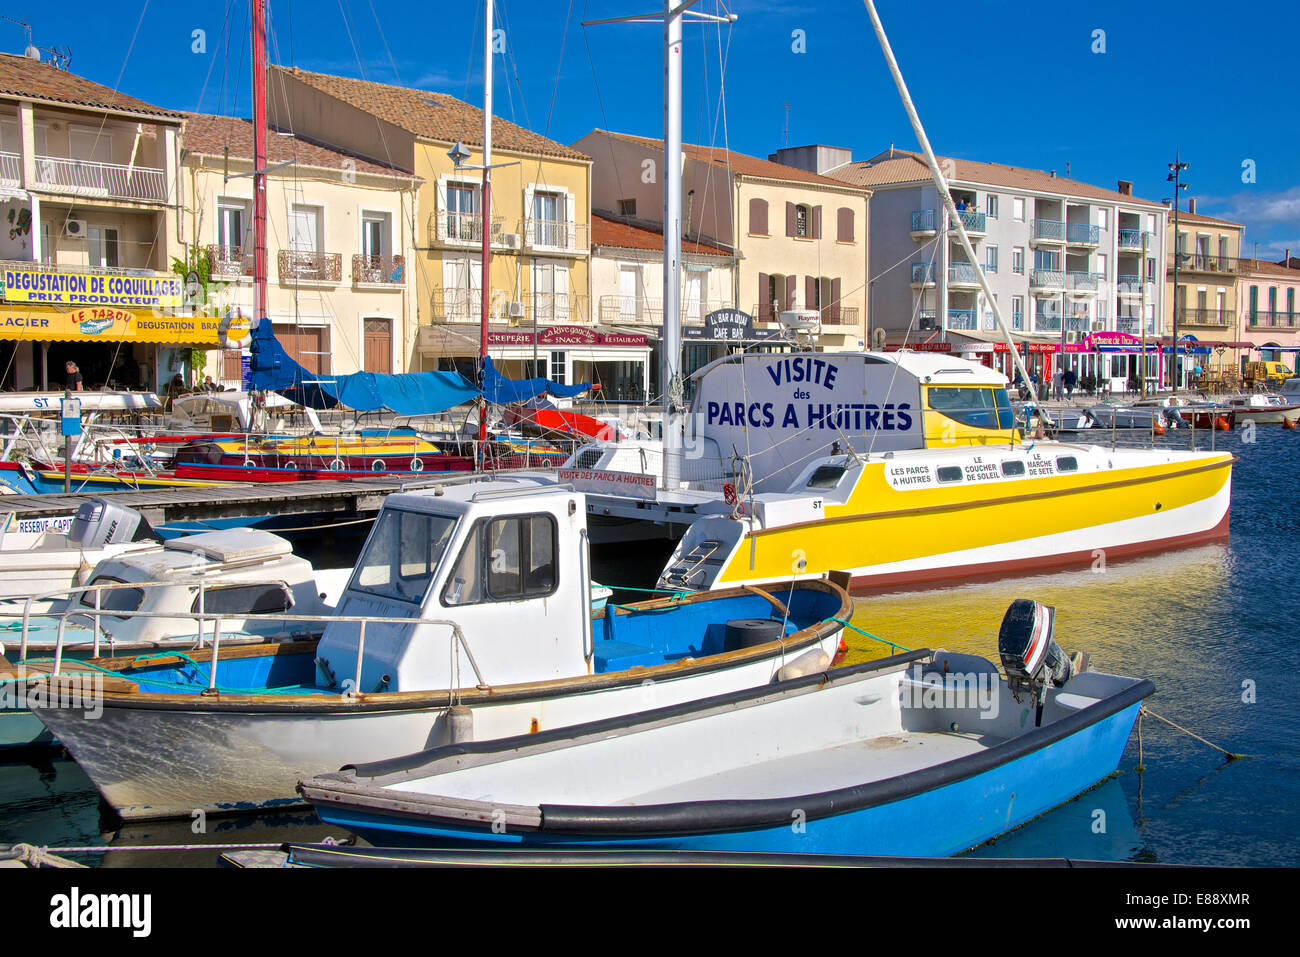 Boats in harbour, Meze, Herault, Languedoc Roussillon region, France, Europe Stock Photo